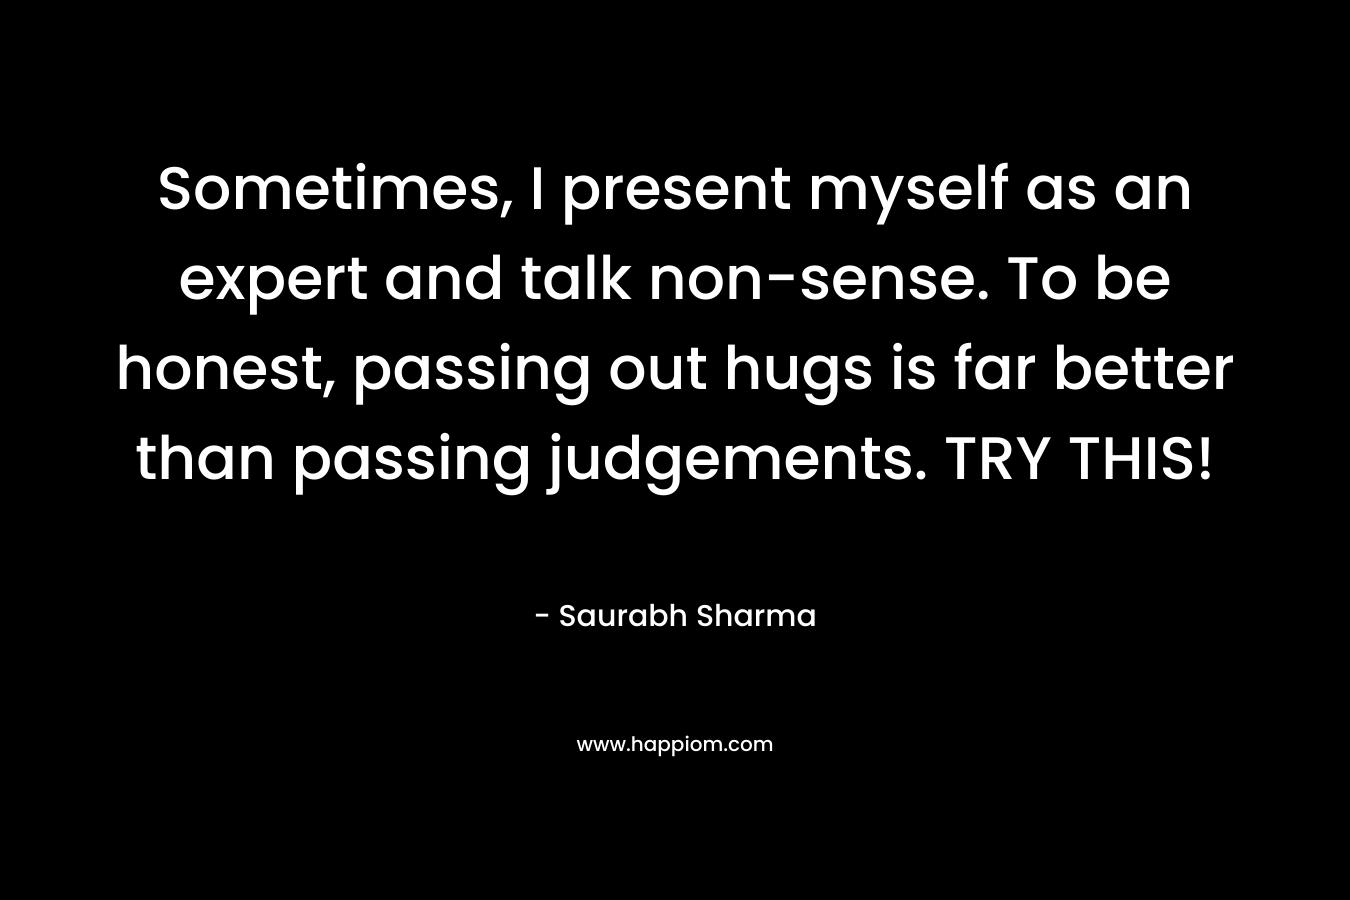 Sometimes, I present myself as an expert and talk non-sense. To be honest, passing out hugs is far better than passing judgements. TRY THIS! – Saurabh Sharma